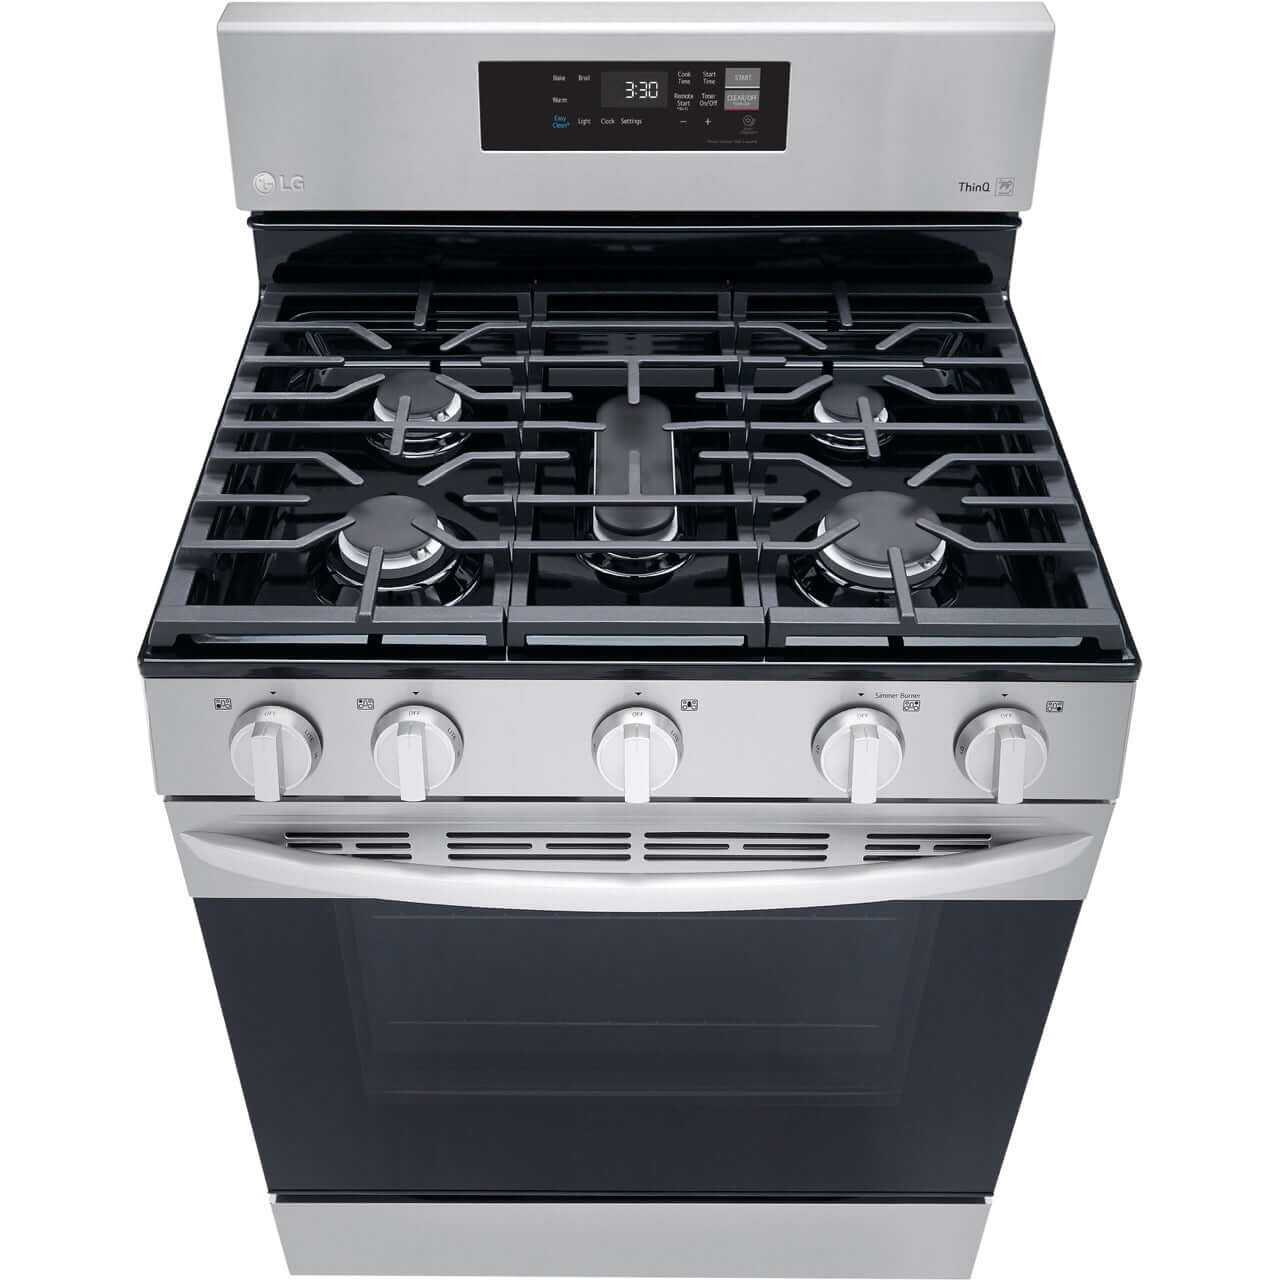 LG 5.8-Cu. Ft. Gas Smart Range with EasyClean, Stainless Steel (LRGL5821S)